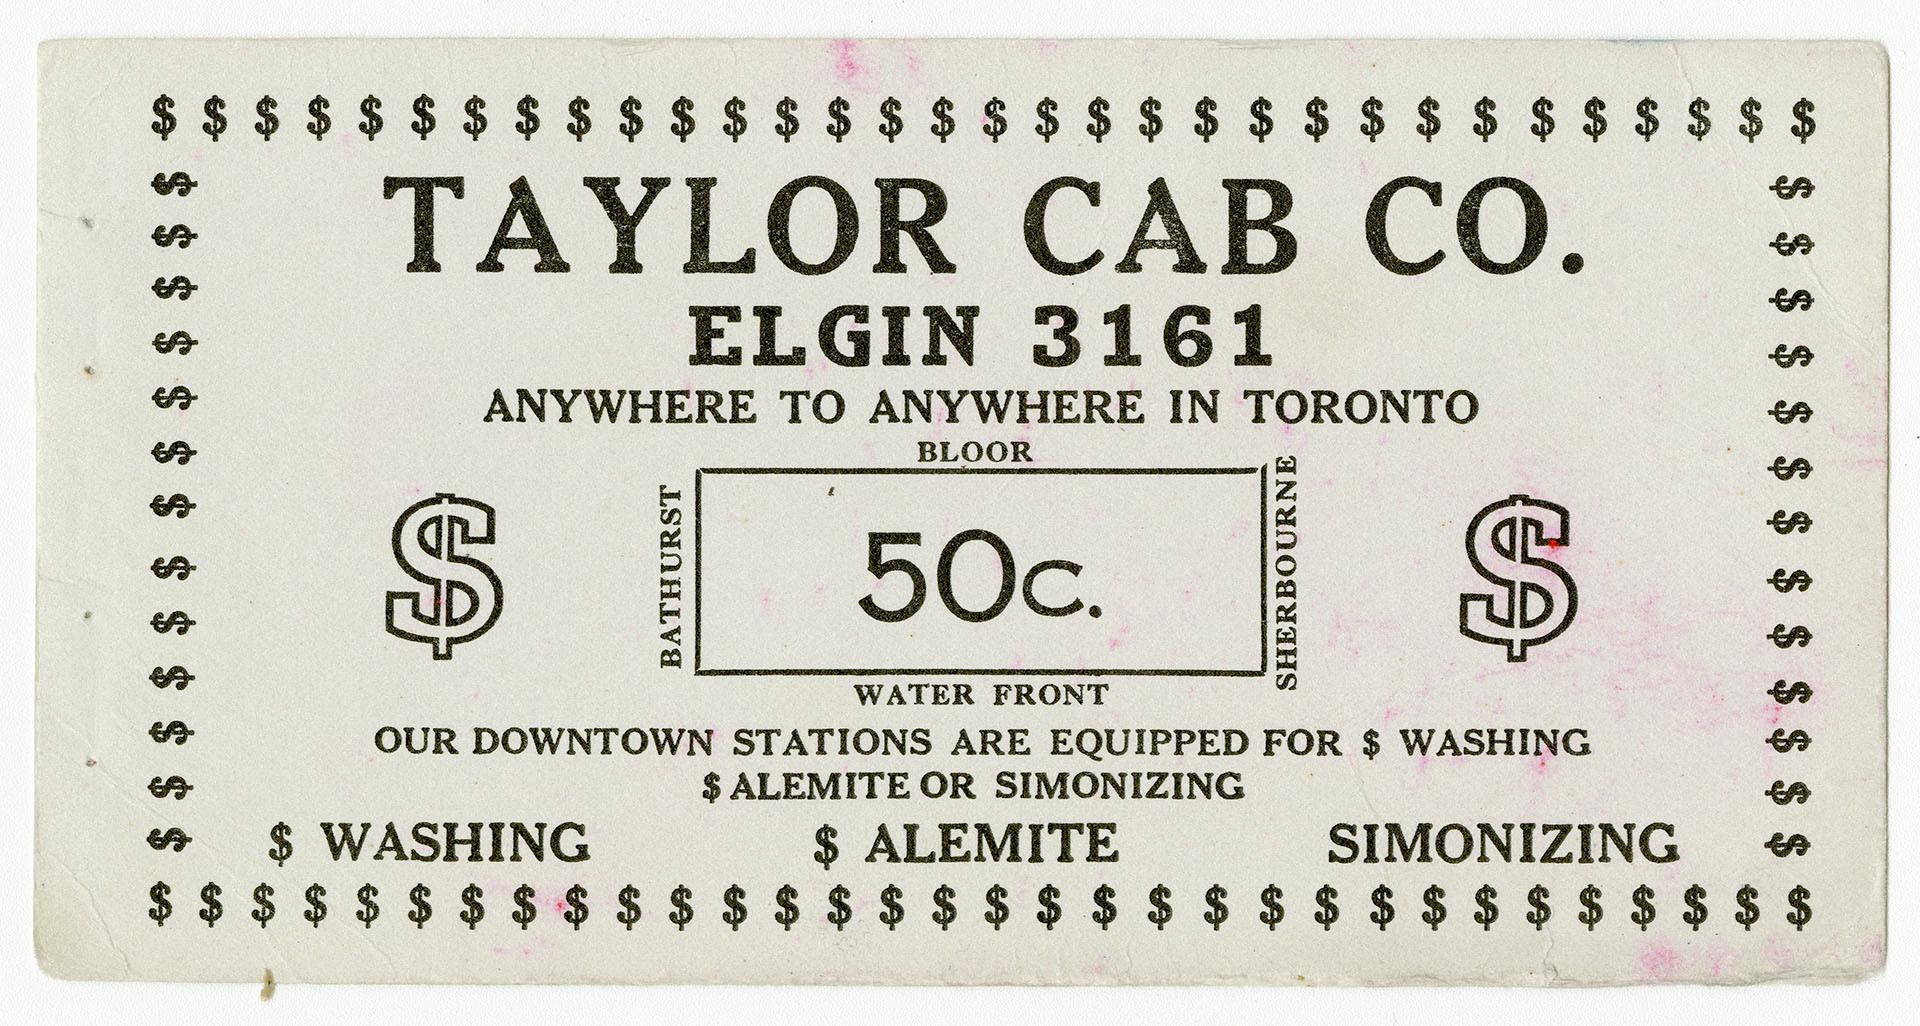 Taylor Cab Co., Elgin 3161, anywhere to anywhere in Toronto